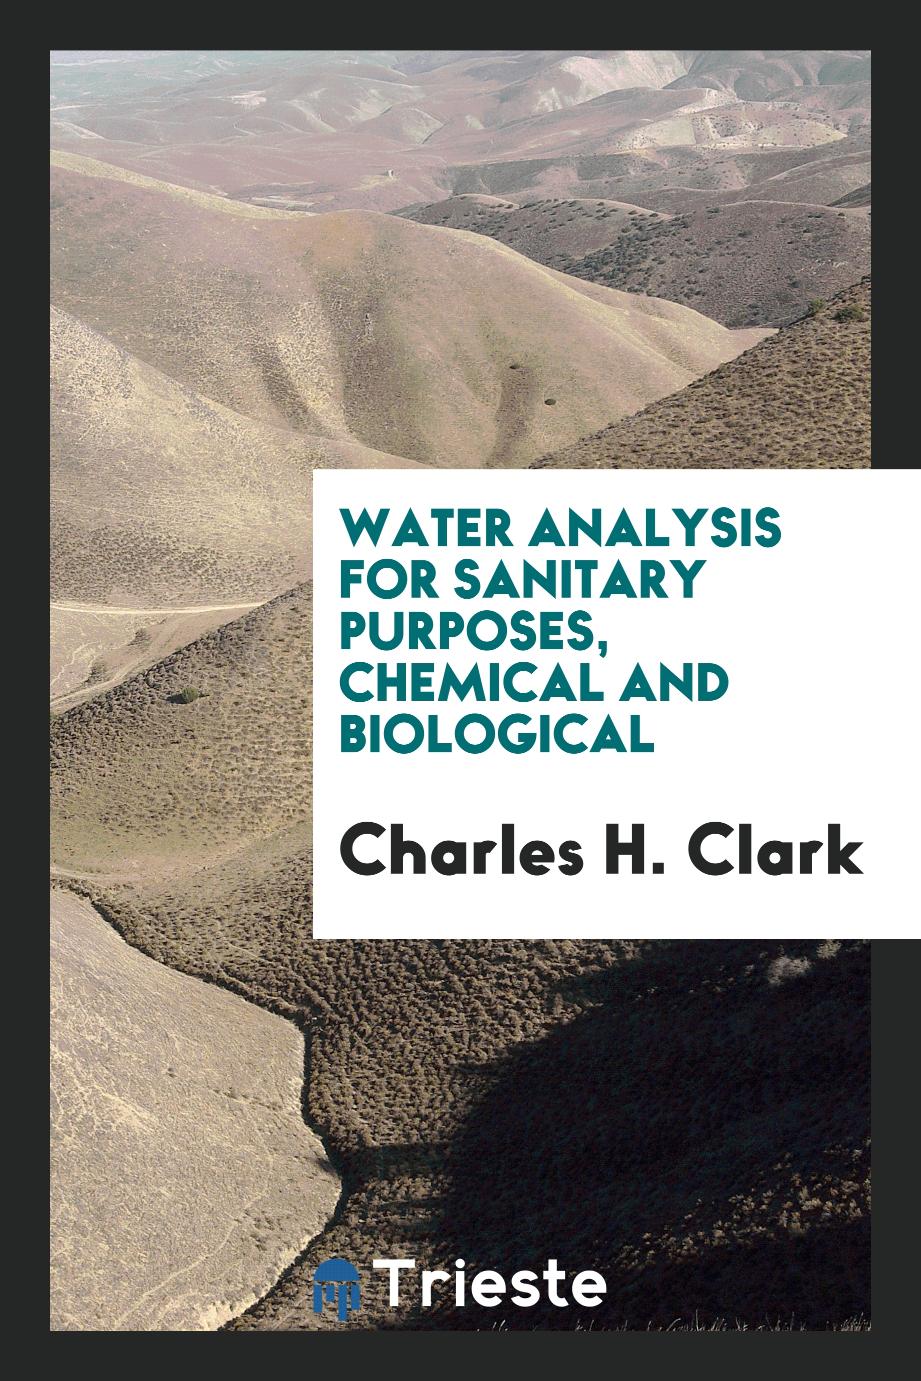 Water analysis for sanitary purposes, chemical and biological